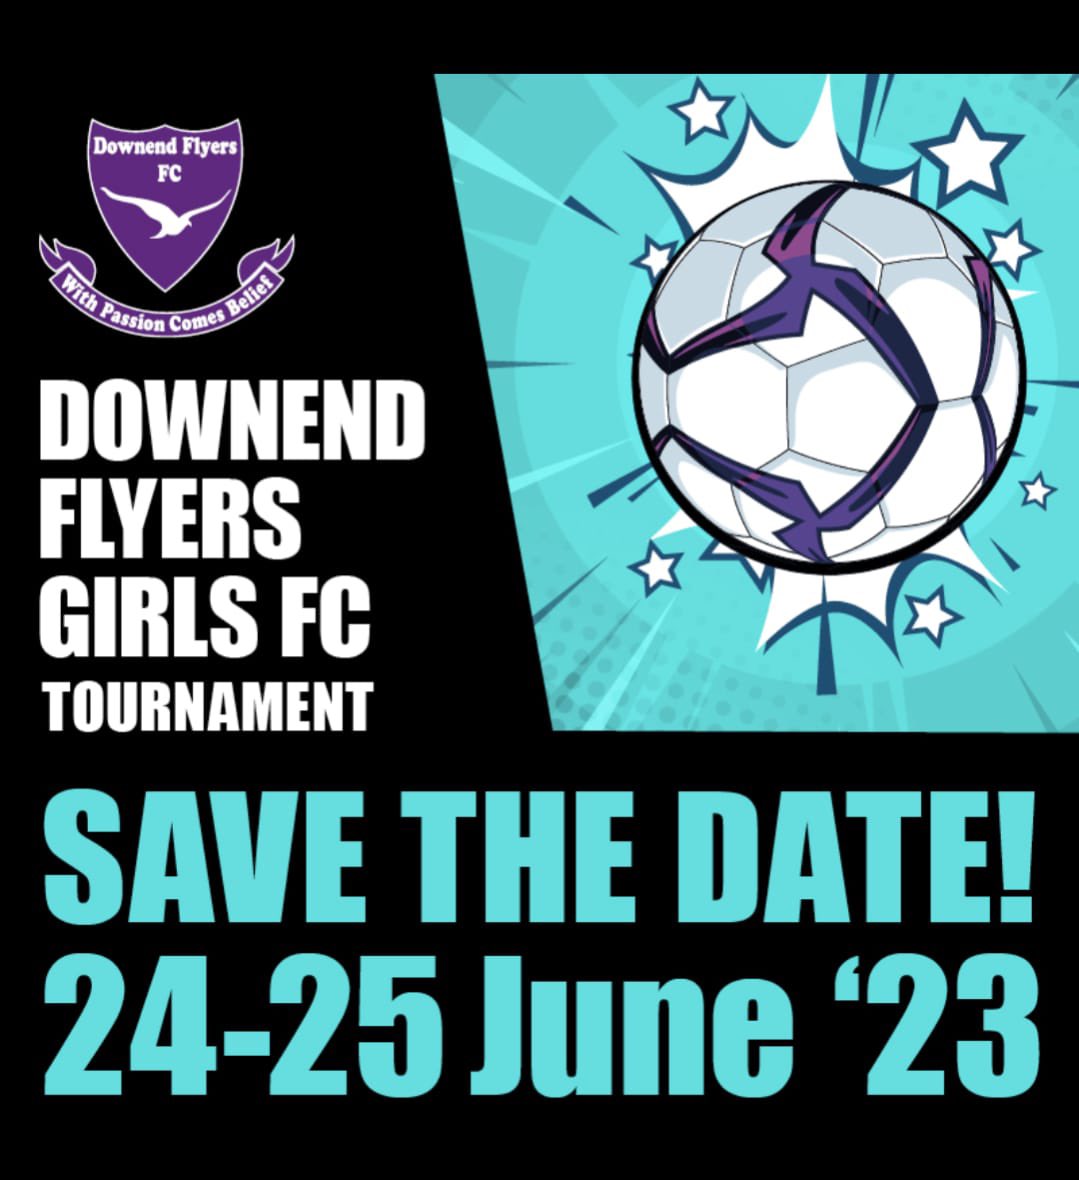 We are excited to announce our summer tournament!!

Sat - U7, U8, U10, U12, U14 & U16  Sun - U9, U11, U13, U15 & Women                                     

Email your interest now to tournament@downendflyers.com 

#purplepower